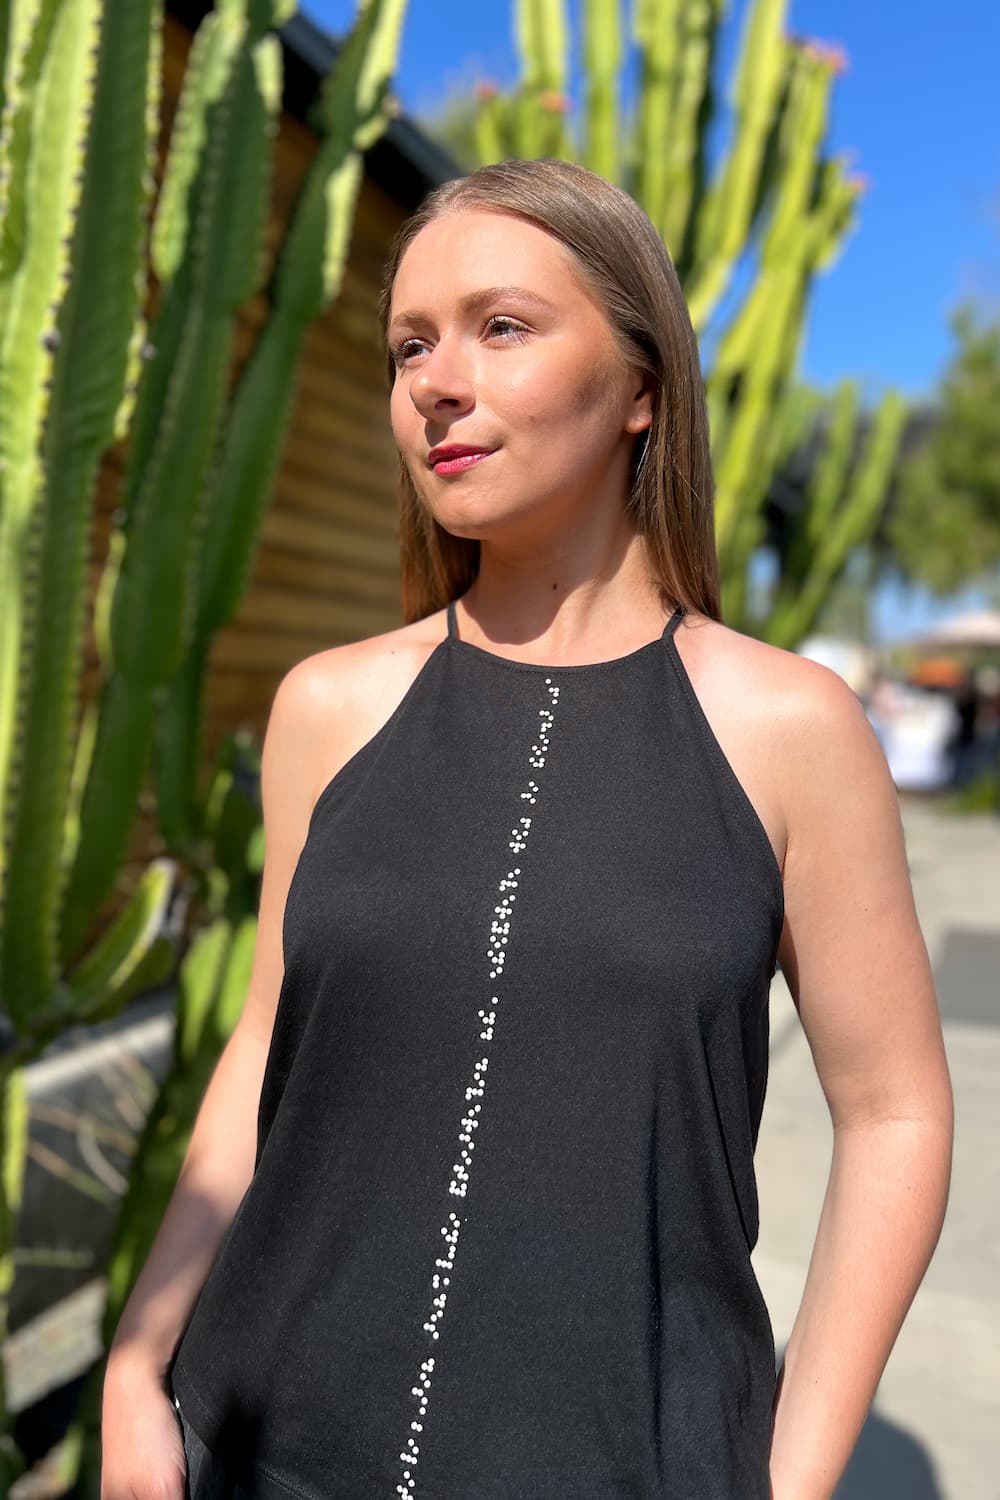 High neck black tank top with white braille beadwork down the center front